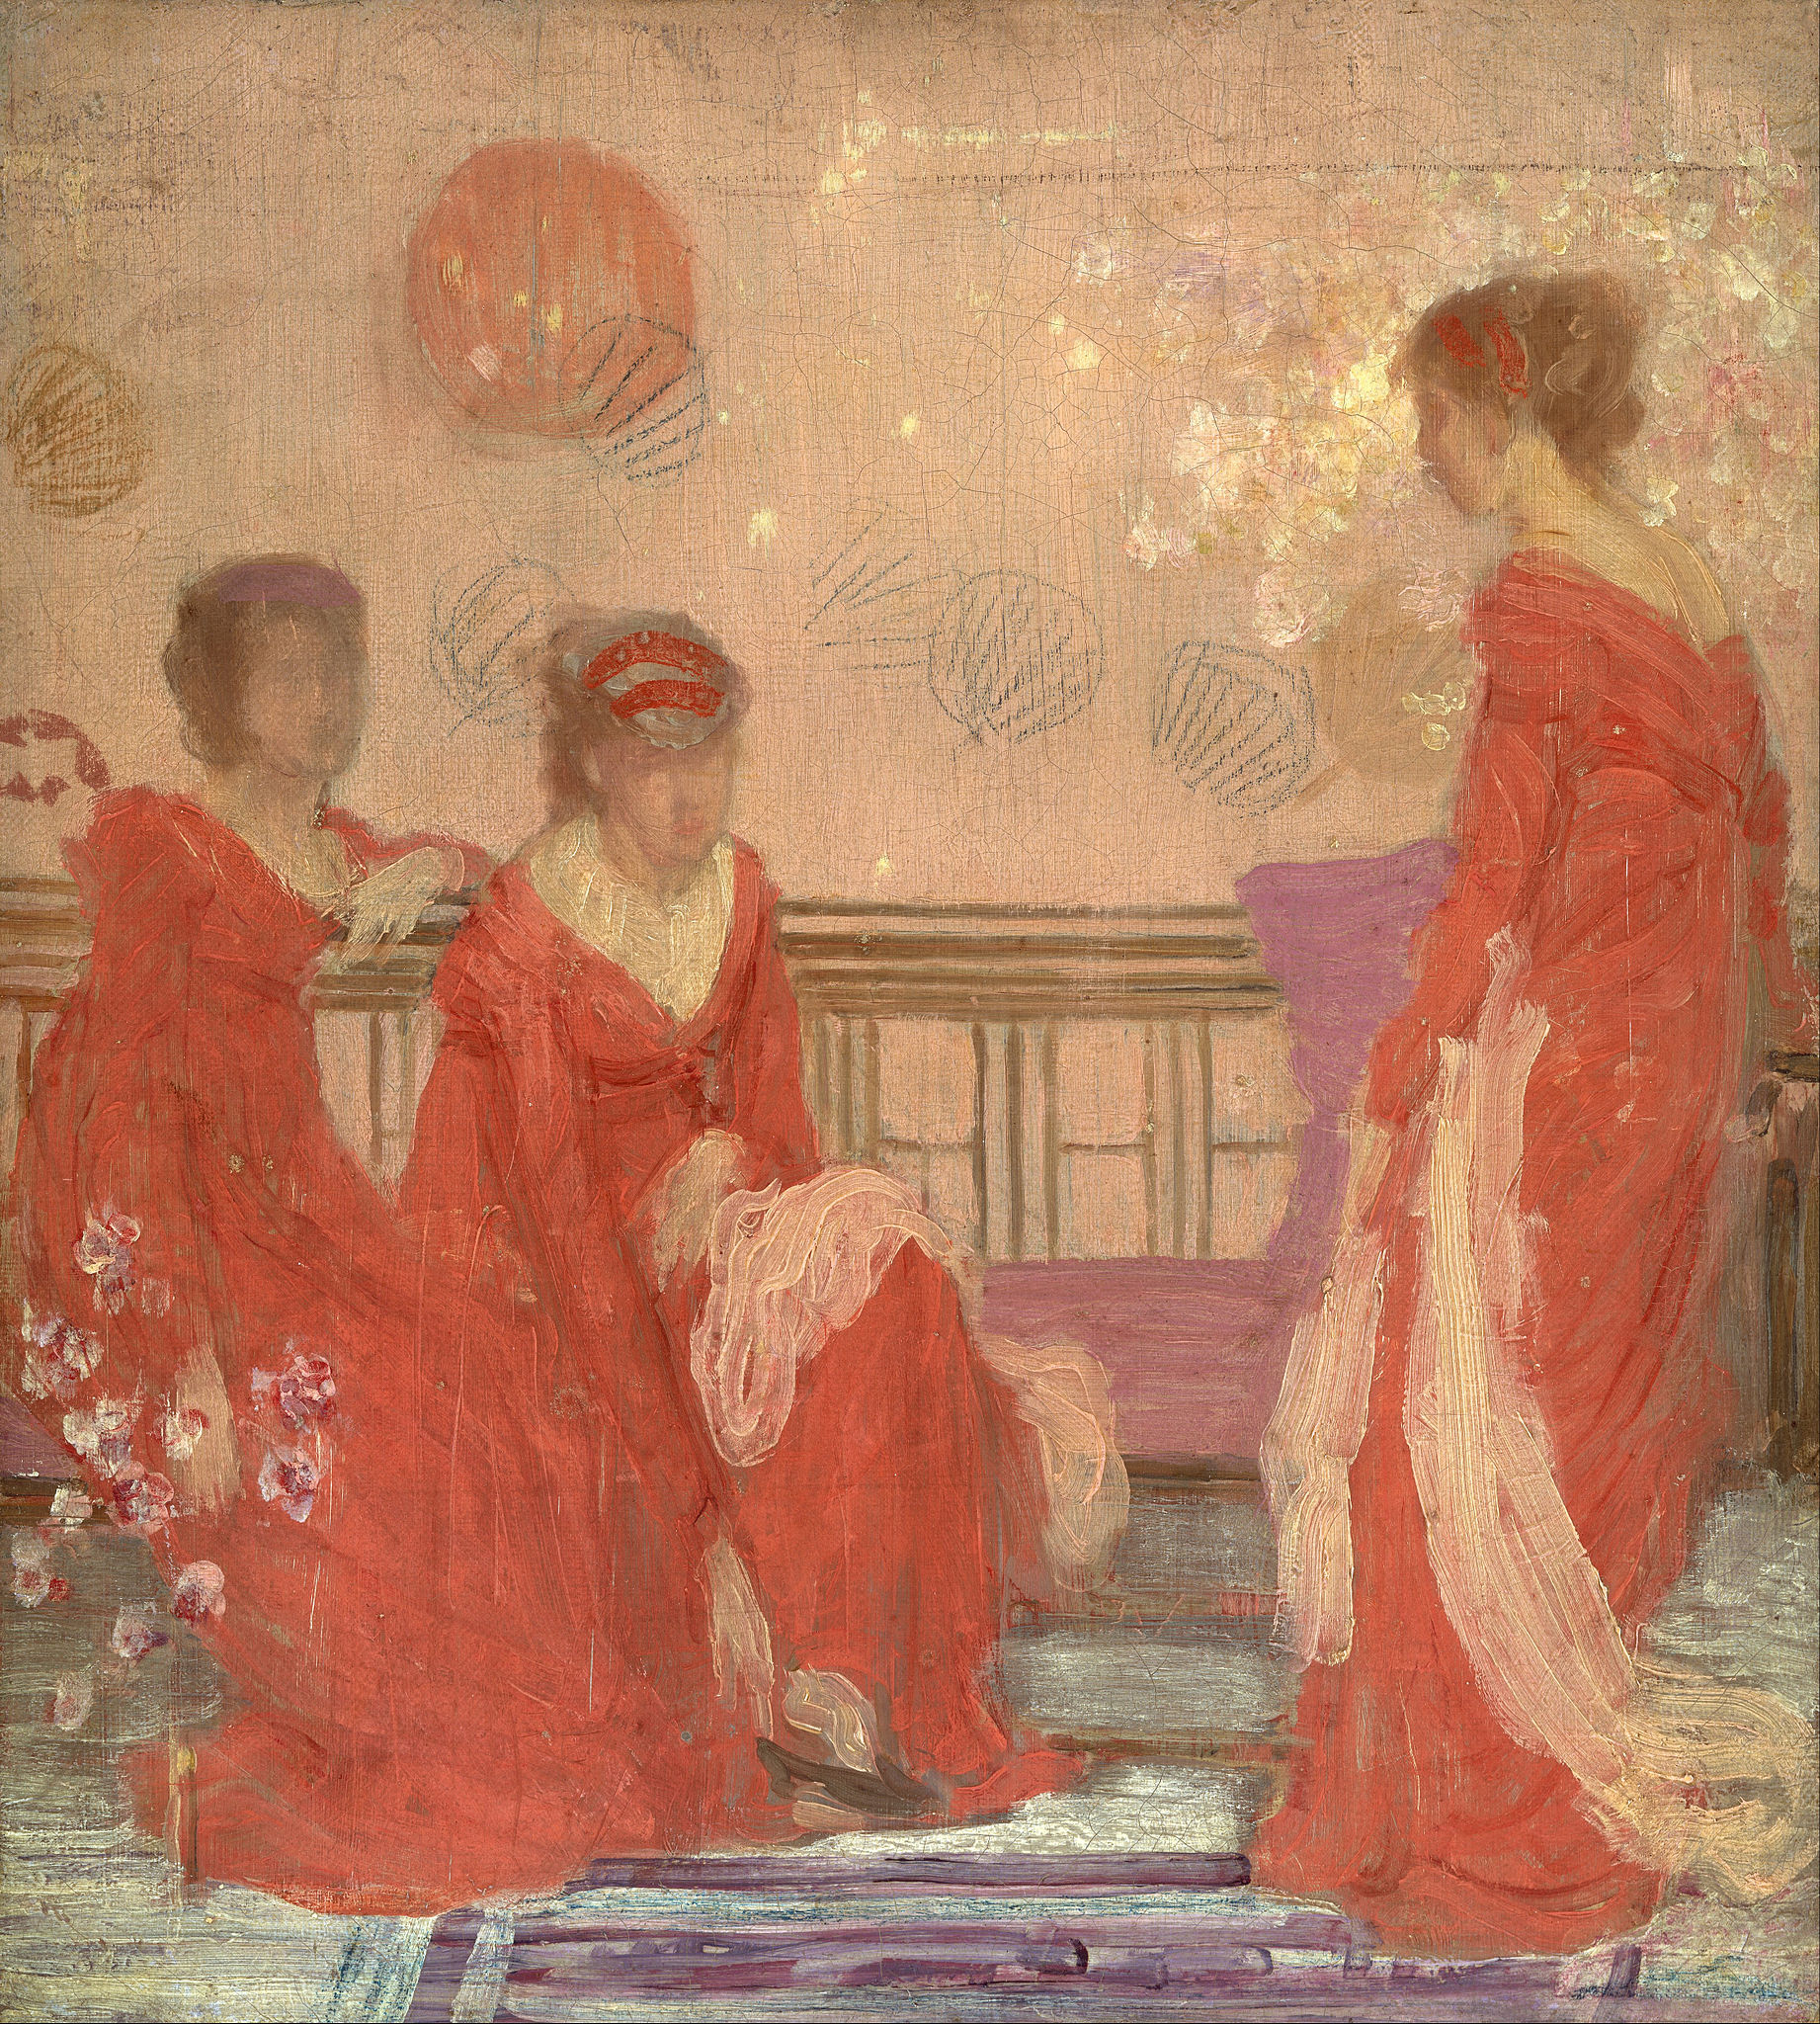 Harmony in Flesh Colour and Red by James Abbott McNeill Whistler - about 1869 - 55.6 x 396.9 cm Museum of Fine Arts Boston